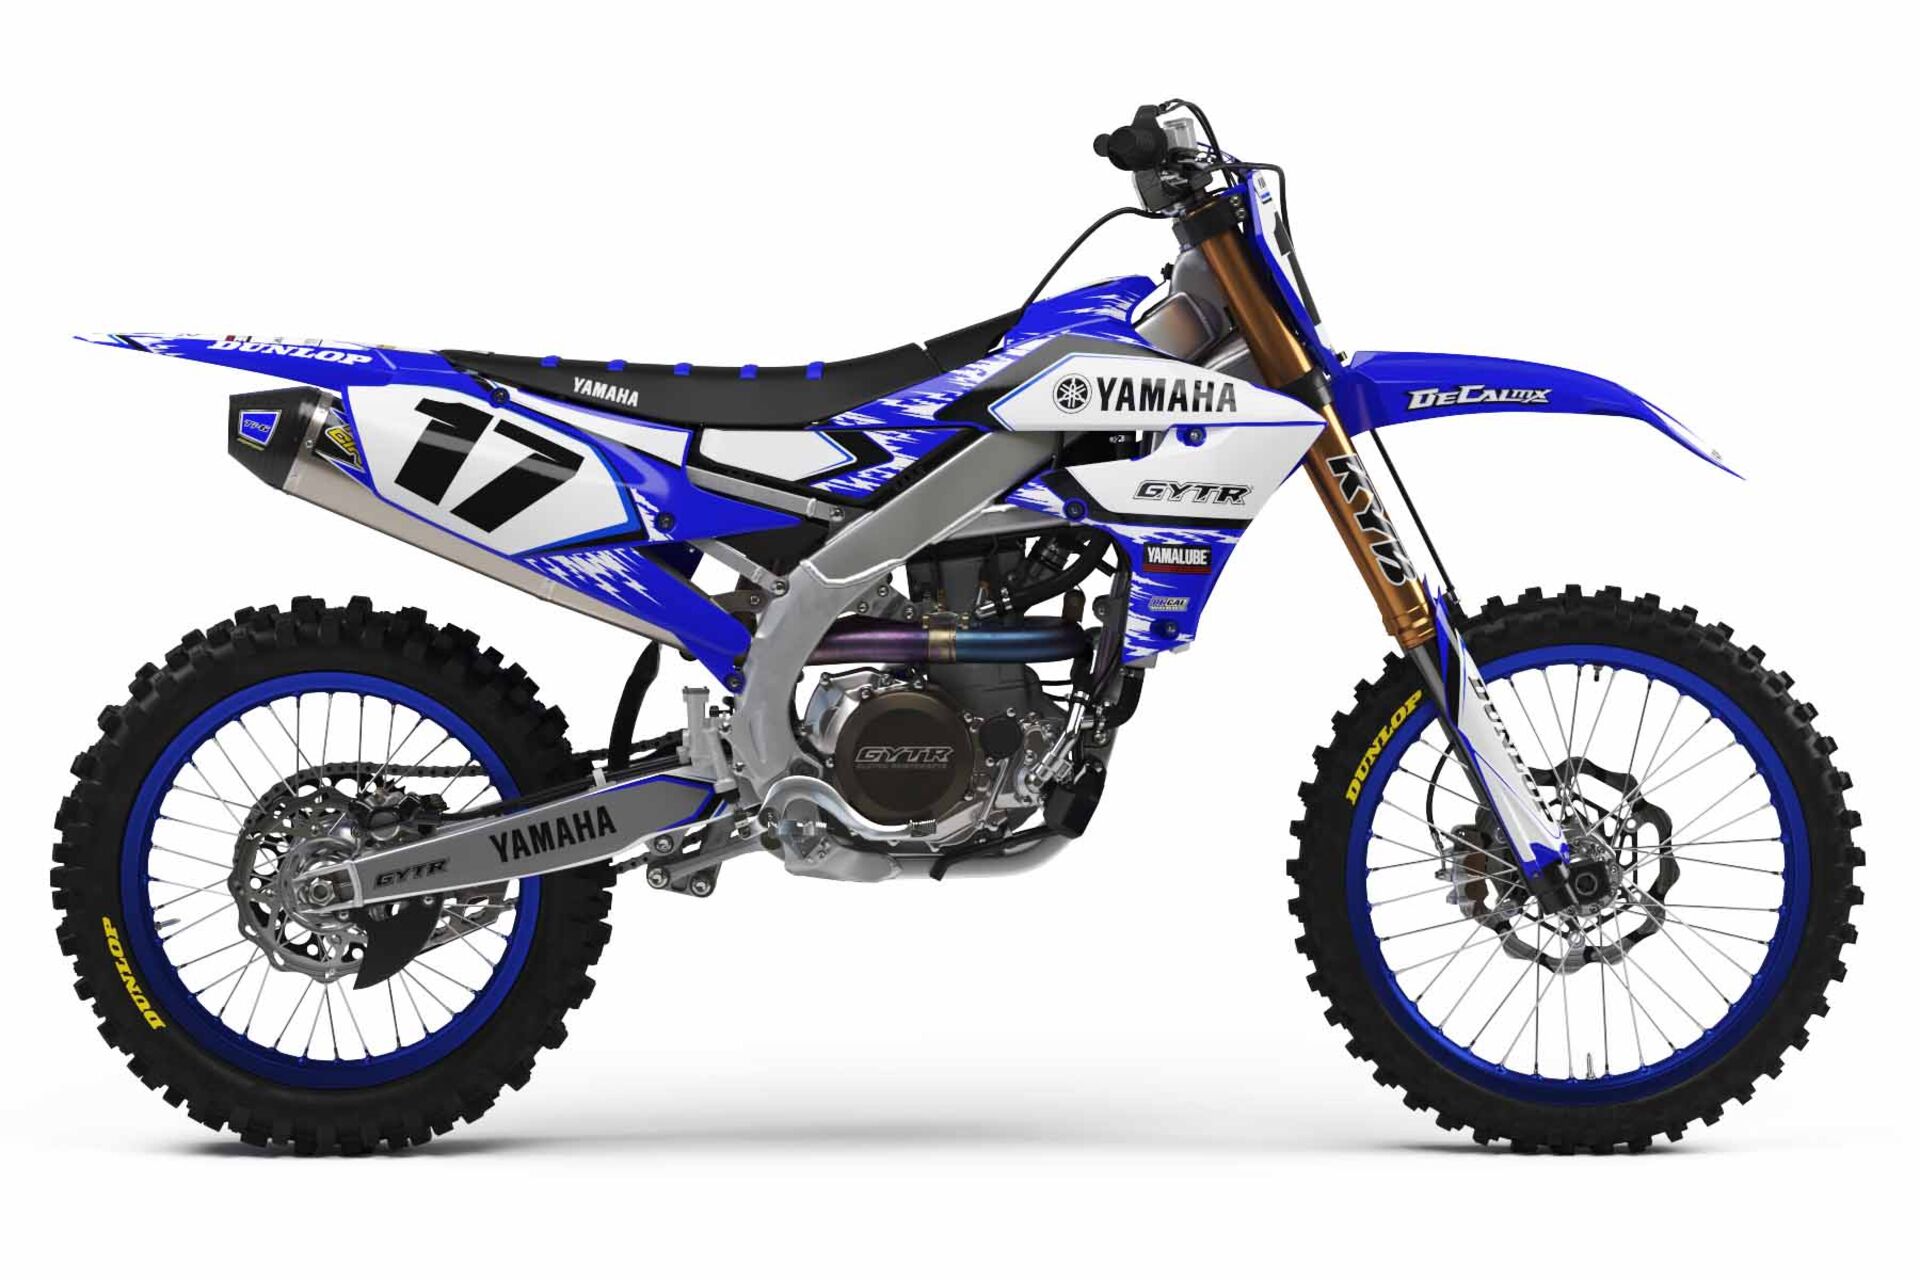 Ready Made Complete Graphics Kit Yamaha YZ125 (2 Stroke) 2015 T-17 Series